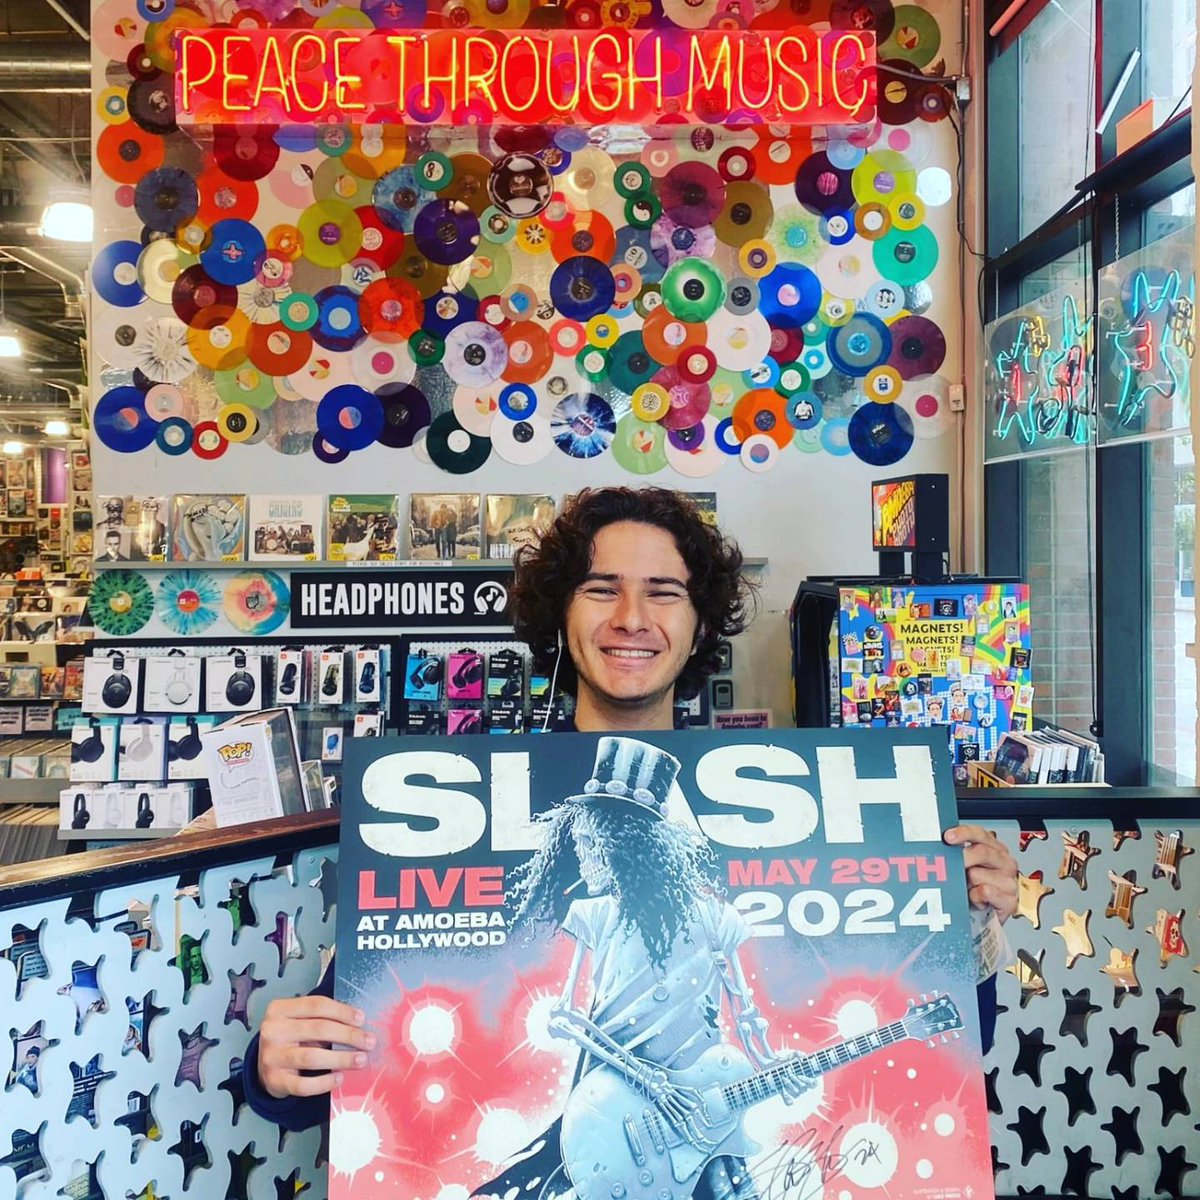 Tix to attend @Slash's May 29th acoustic set + this commemorative poster which was HAND-SIGNED 🖊️ in advance by Slash are available now with pre-purchase of his new album 'Orgy of the Damned' in-store only at Amoeba Hollywood -- while supplies last! Info: bit.ly/3xZloiz